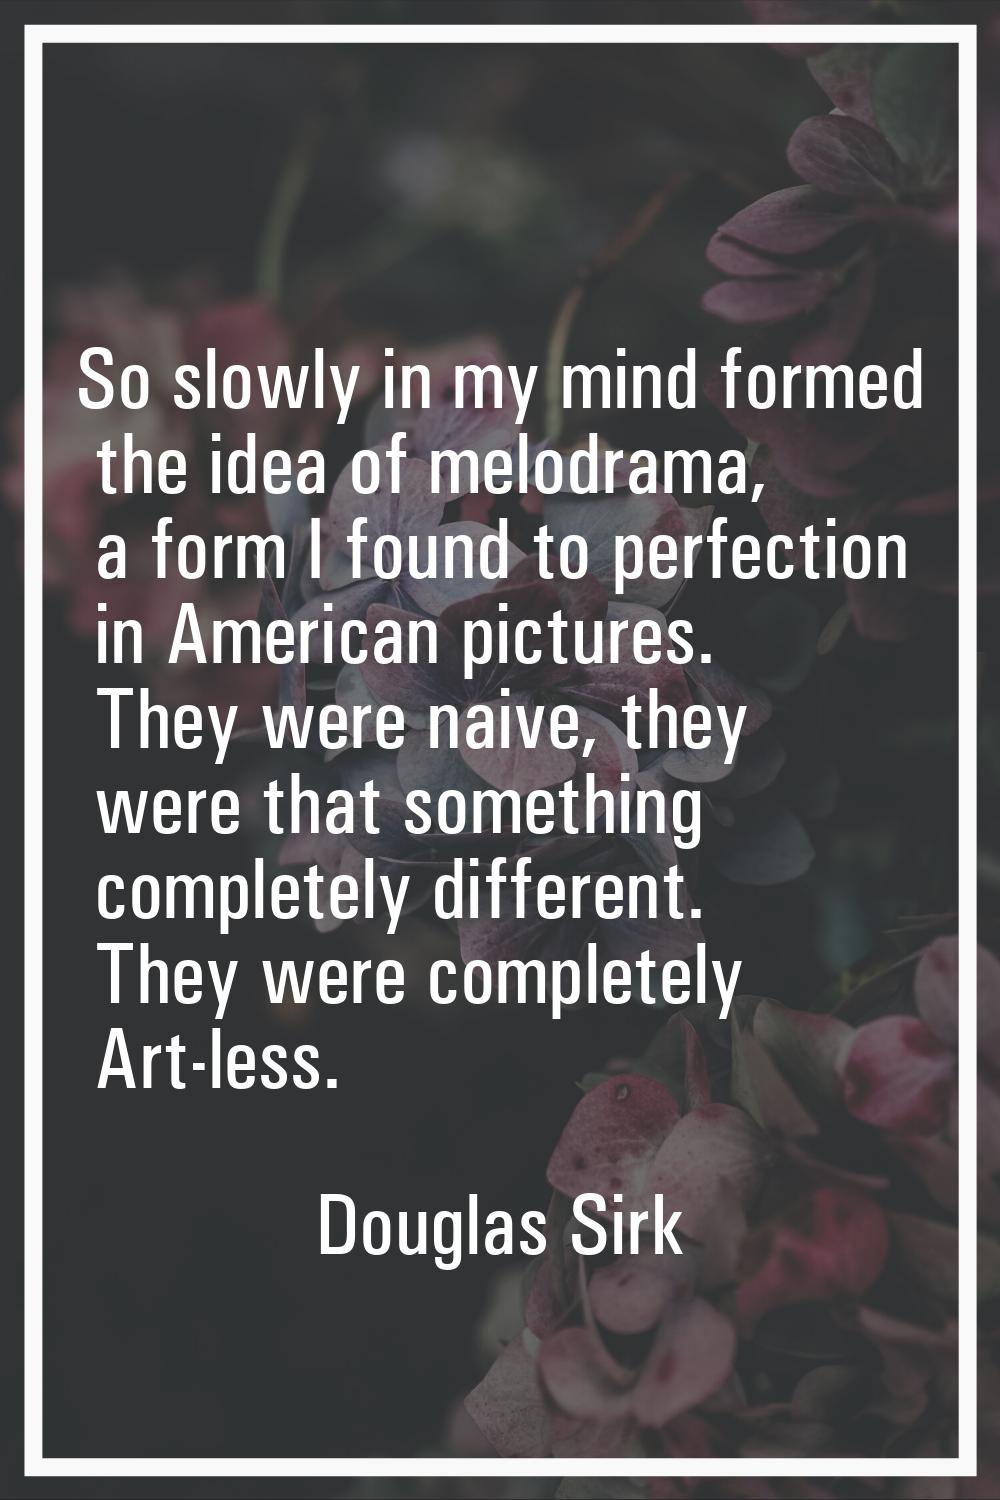 So slowly in my mind formed the idea of melodrama, a form I found to perfection in American picture